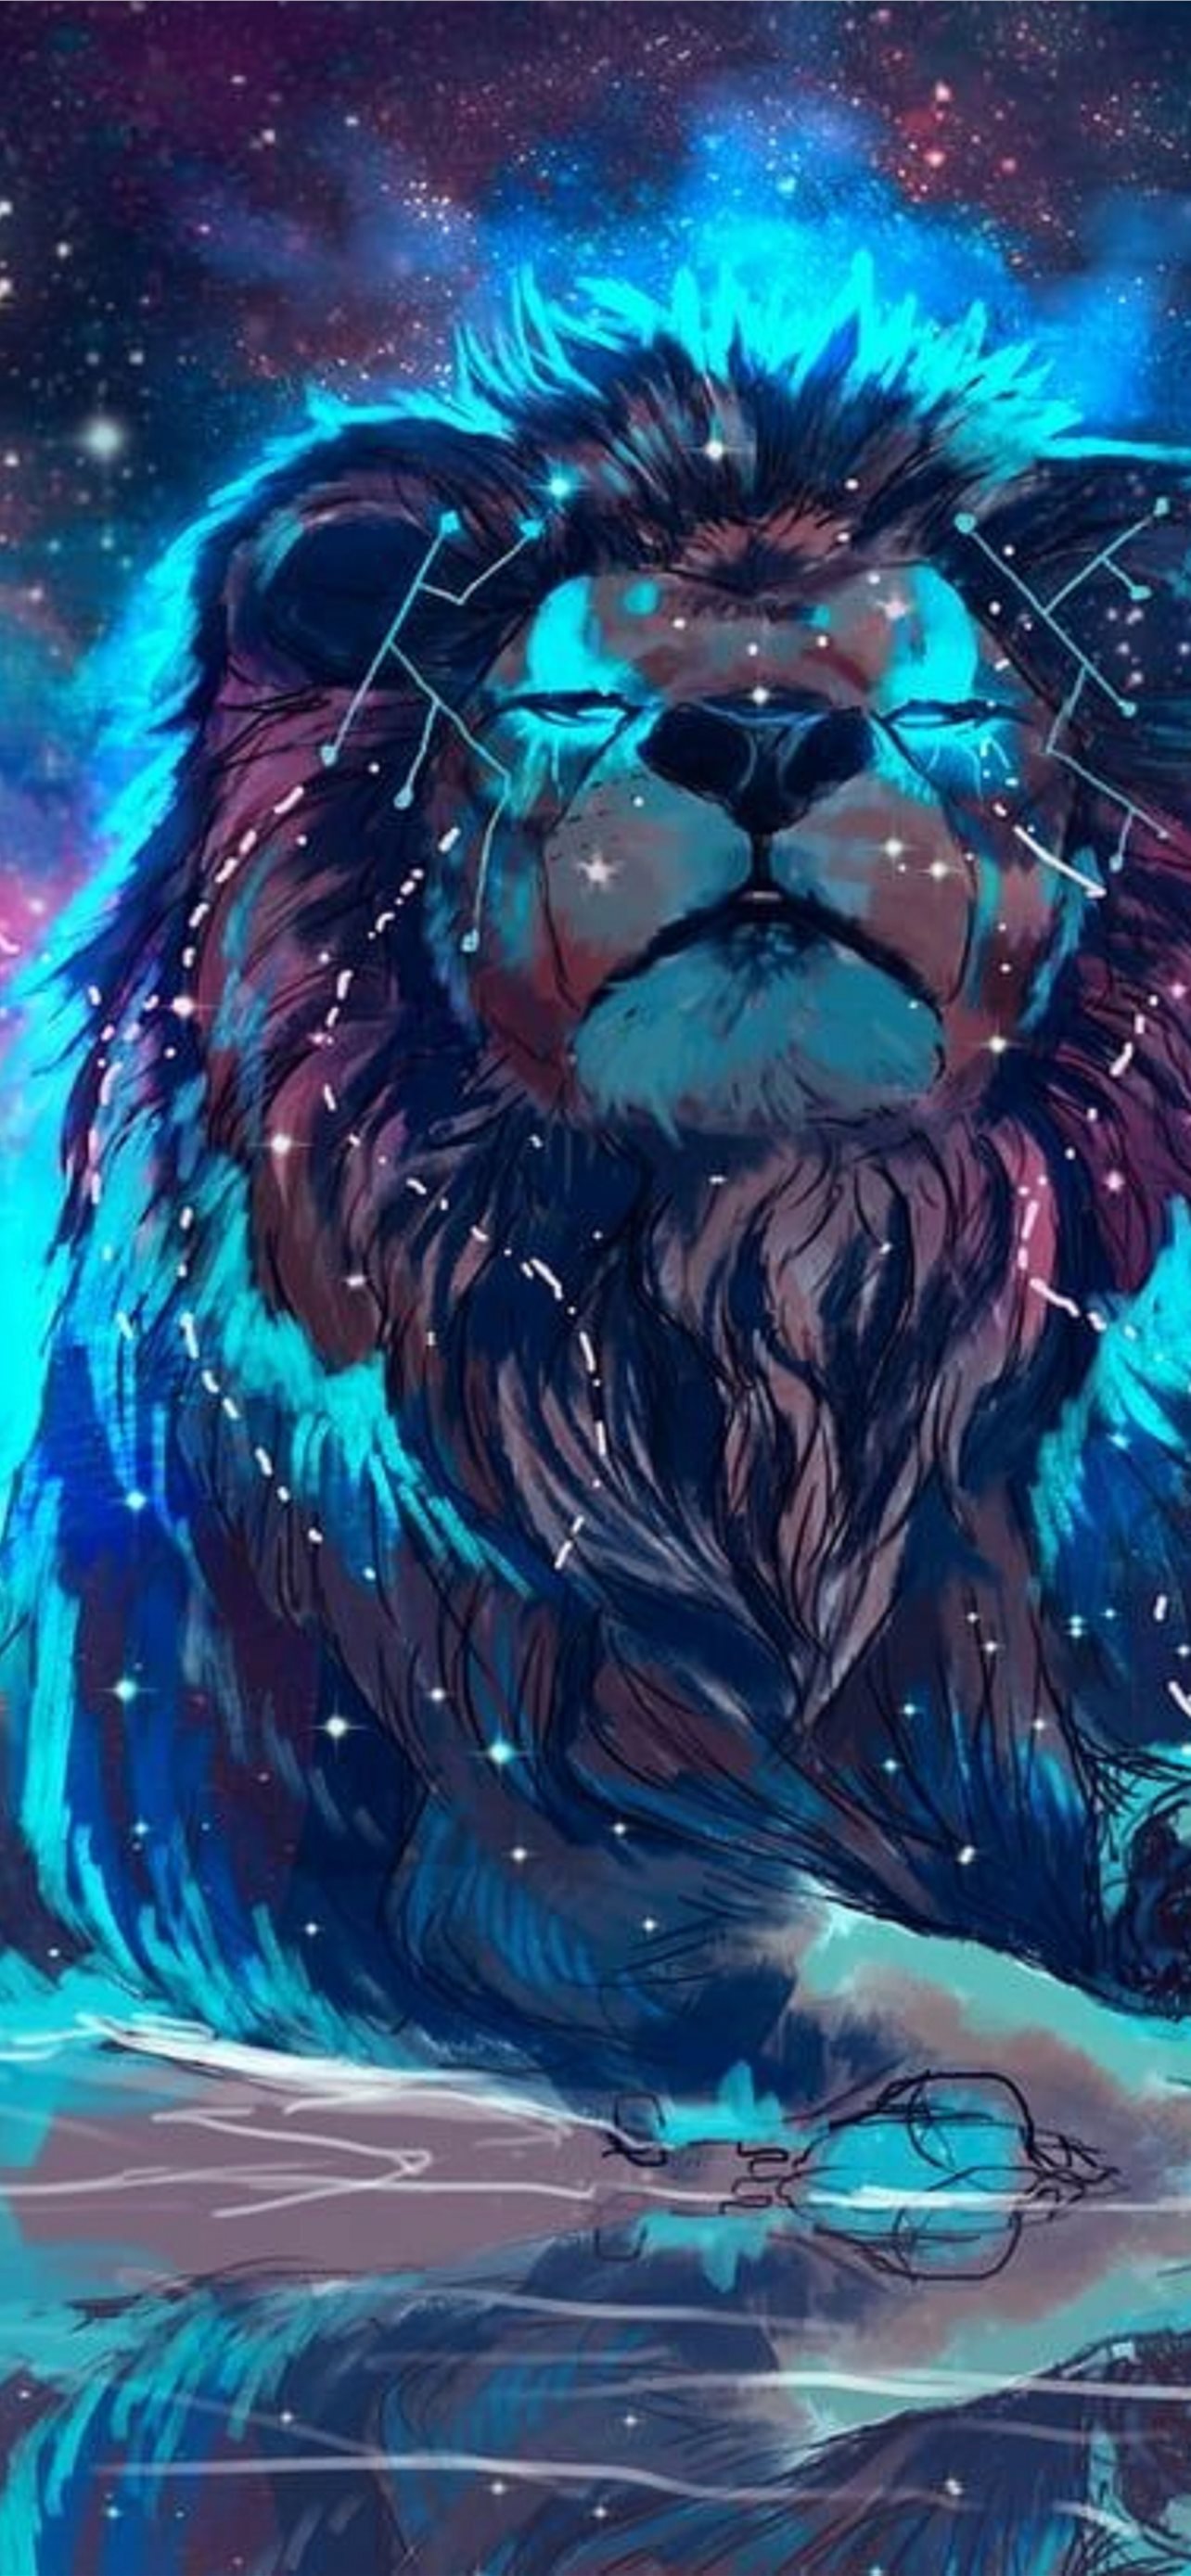 Powerful Lion' Poster by professionaldesigns | Displate